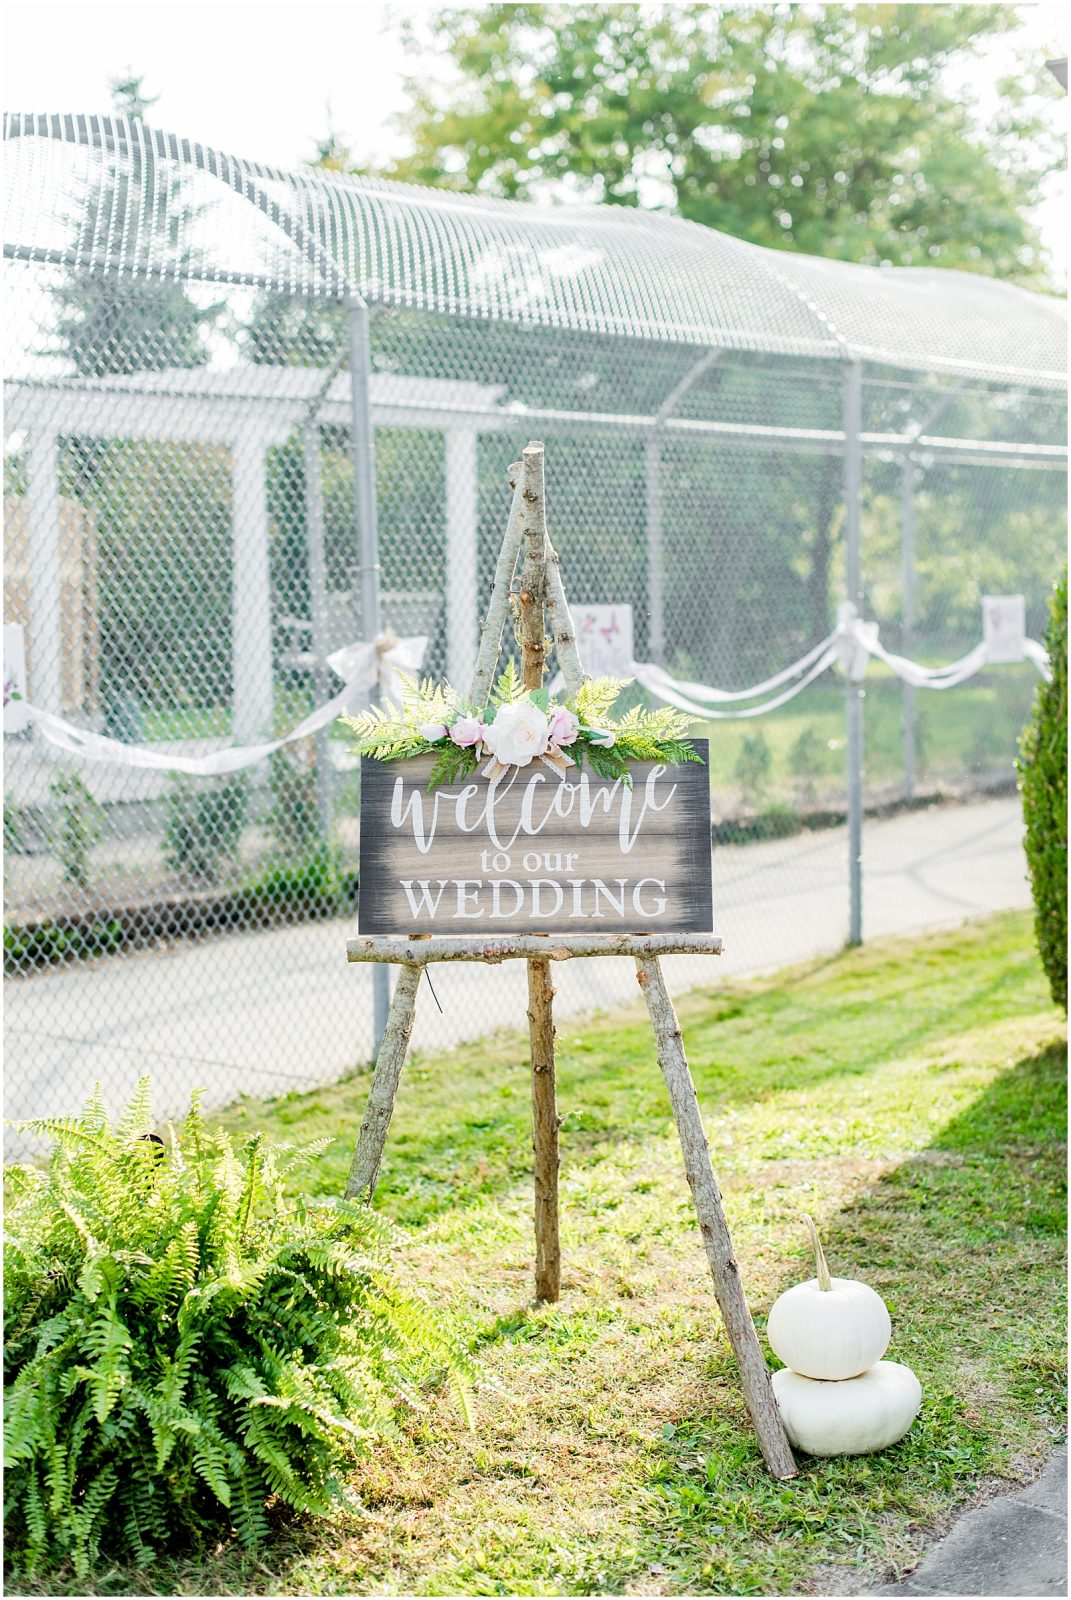 Welcome Sign for Wedding